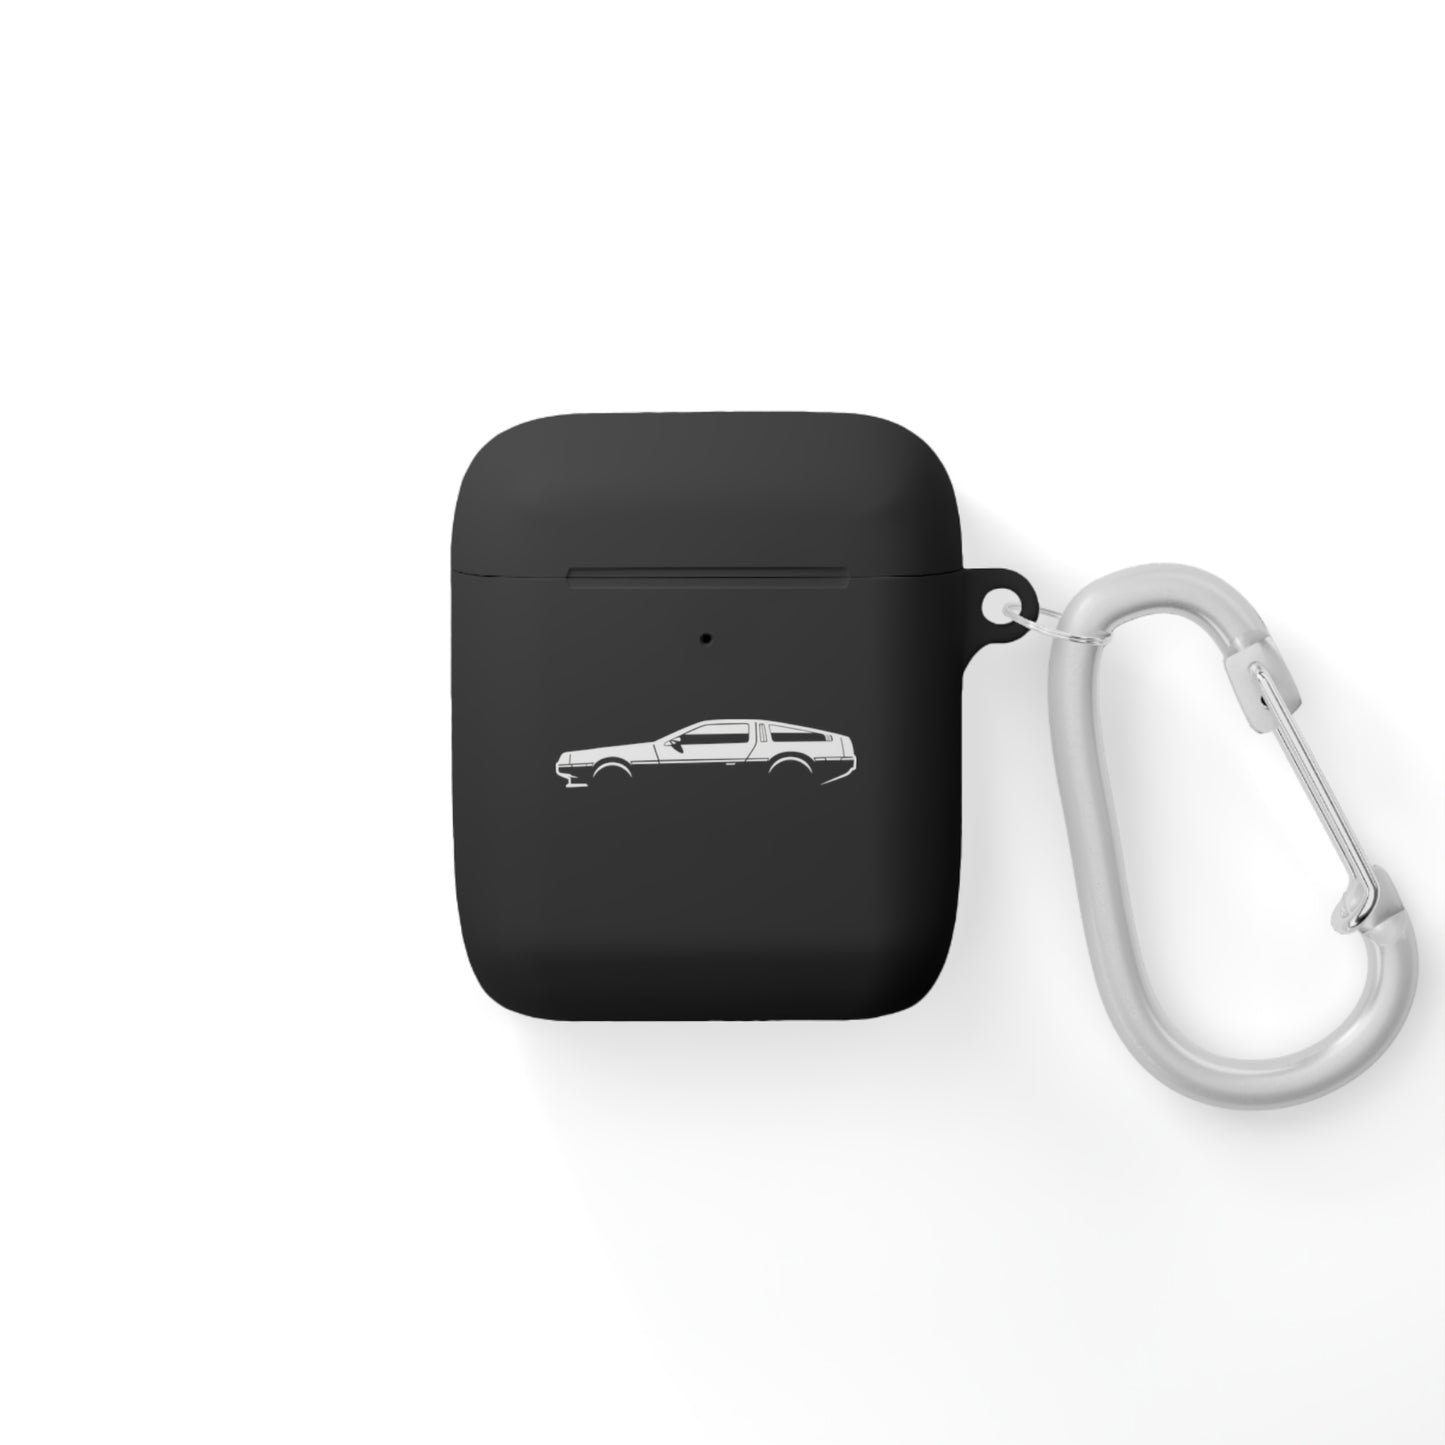 DeLorean: Premium AirPods Case with Iconic Silhouette for Style and Protection